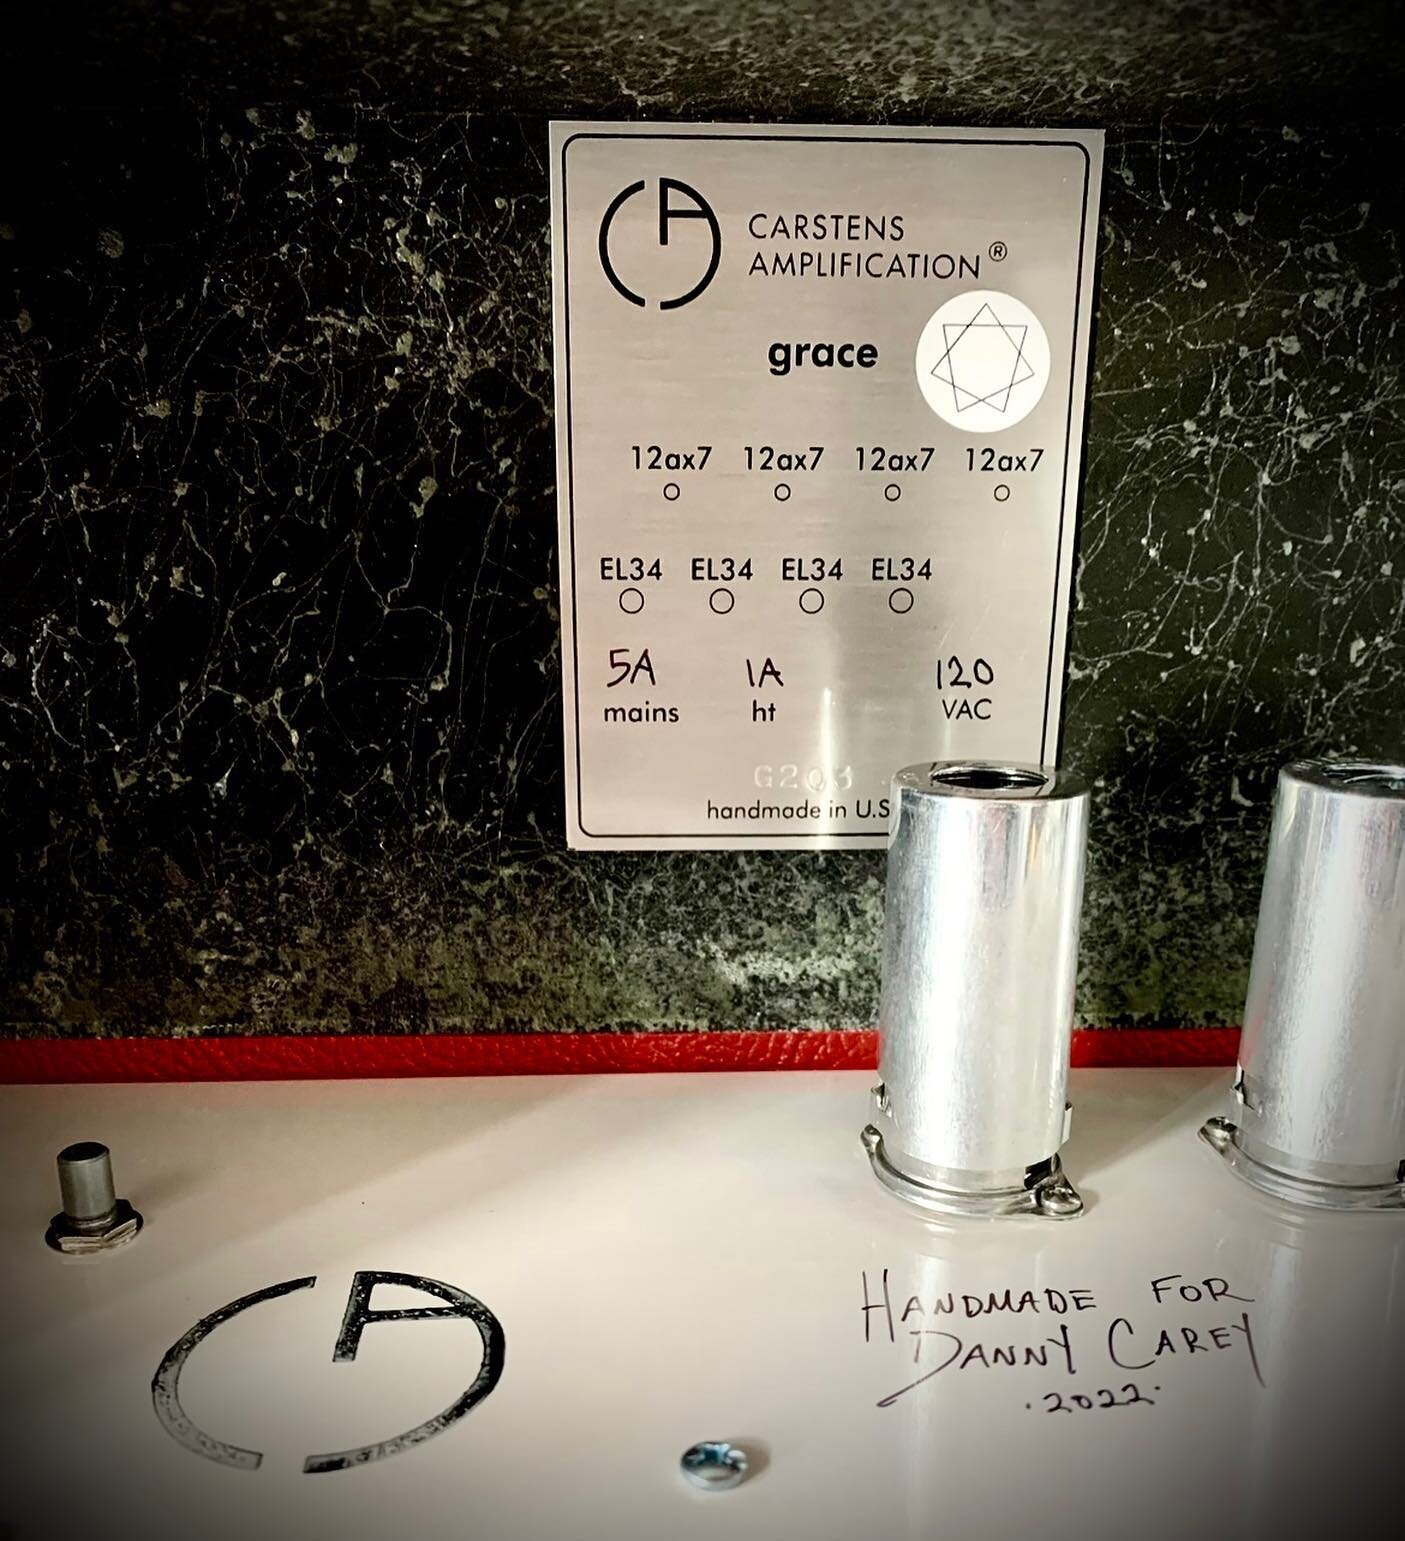 Happy bday to the great Danny Carey. I was honored to build him a custom red Grace amplifier to add to his crazy collection. 🥁🔥

#carstensgrace #dannycarey #toolband #boutiqueamps #handmade #tone #metal #carstensamps